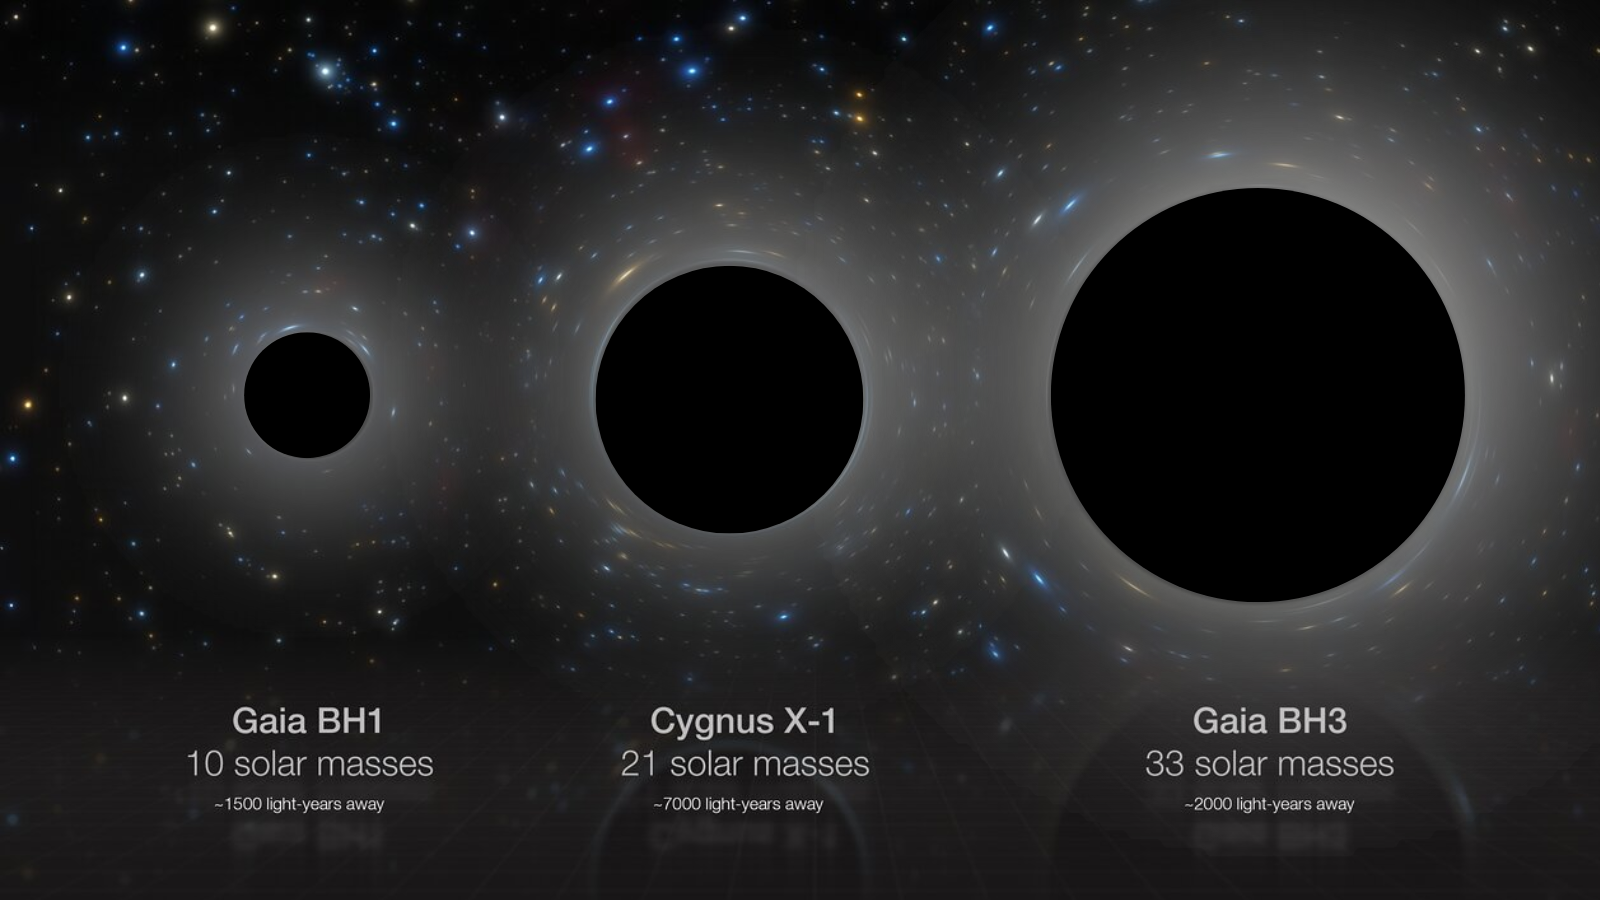 A diagram showing a side-by-side comparison of three black holes